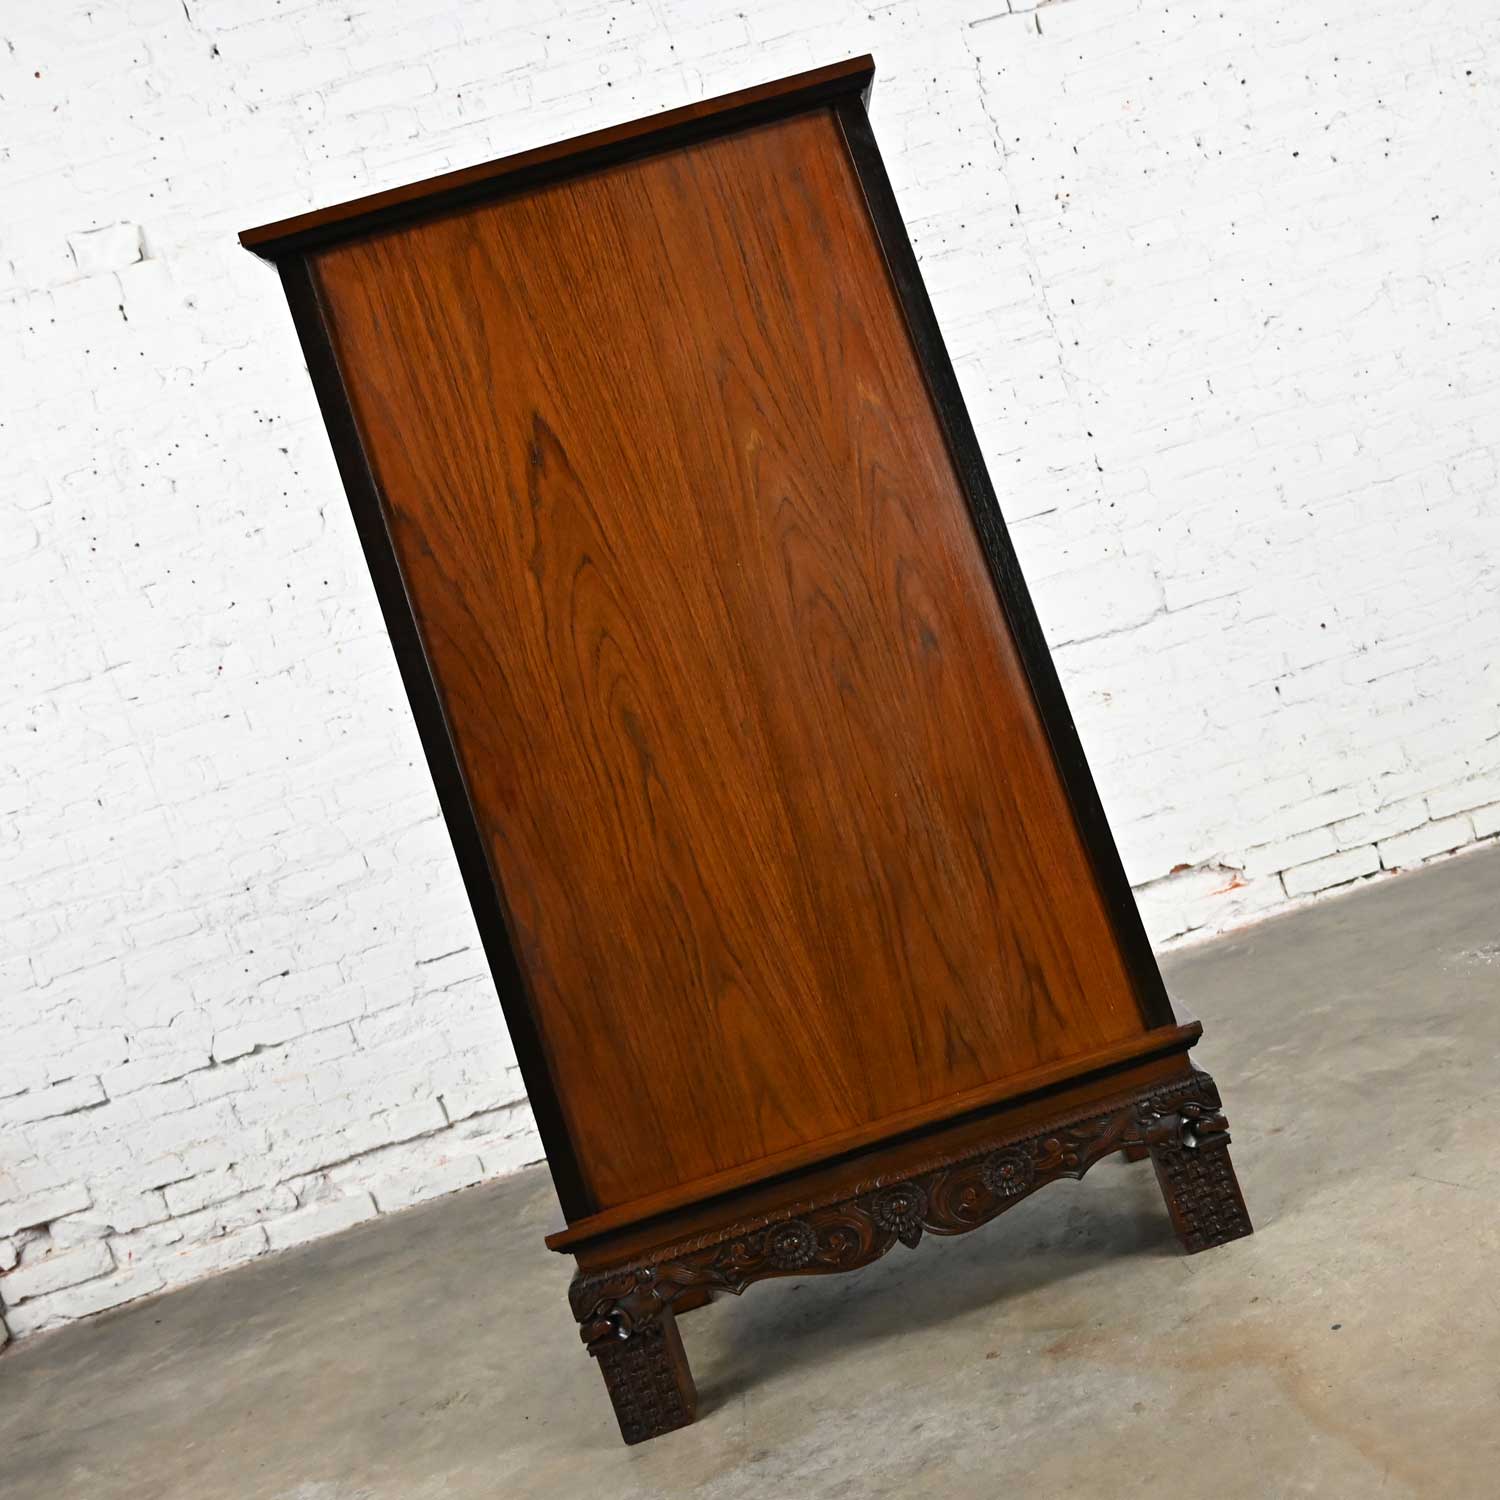 Vintage Chinoiserie Hand Carved Rosewood Trapezoid Armoire Cabinet from Bangkok Thailand